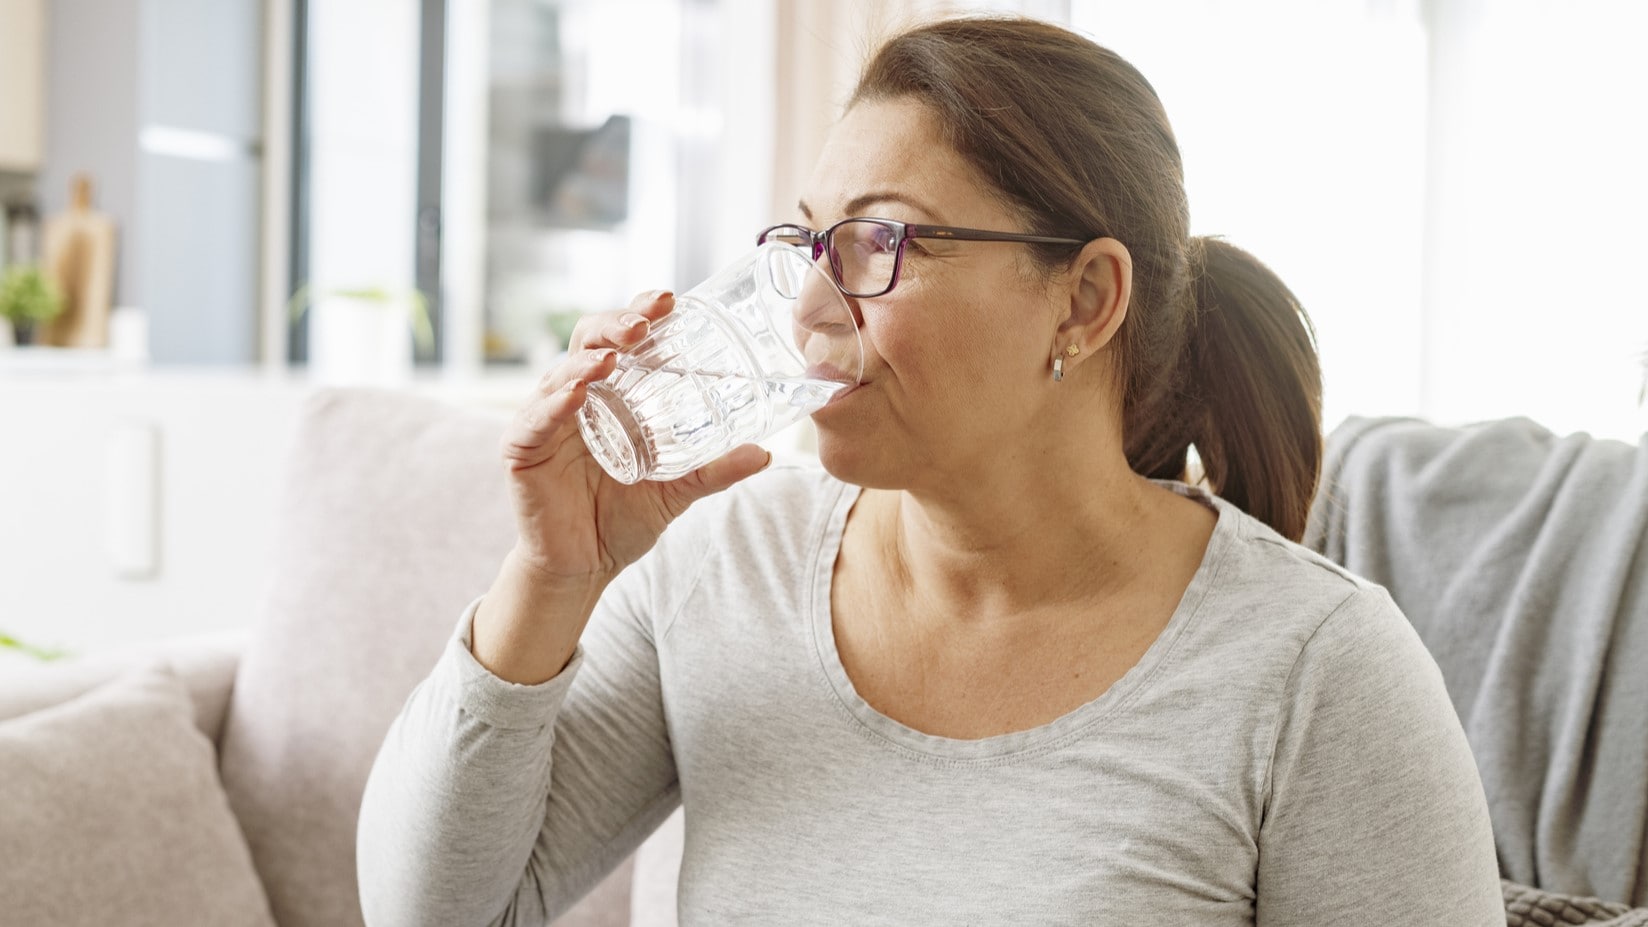 An older adult sitting on a couch drinking a glass of water.